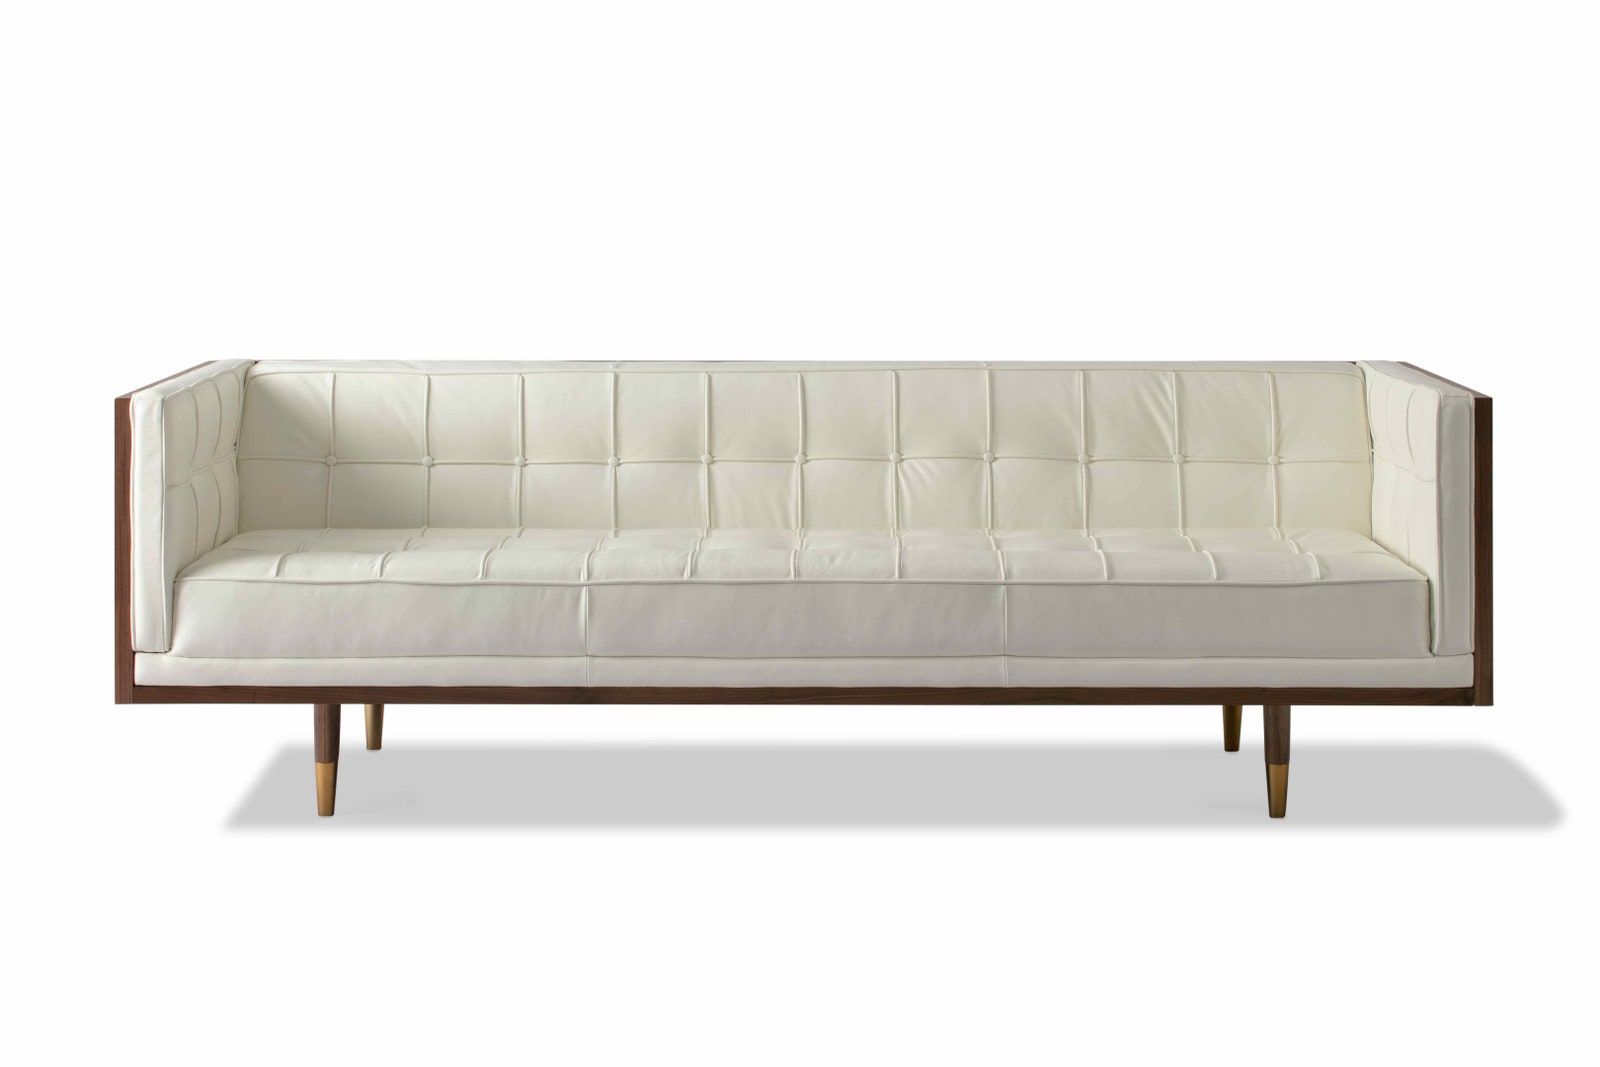 5 Mid Century Modern Sofas To Breathe Life Into Your Living Space |  Architectural Digest Pertaining To Mid Century Modern Sofas (View 6 of 15)